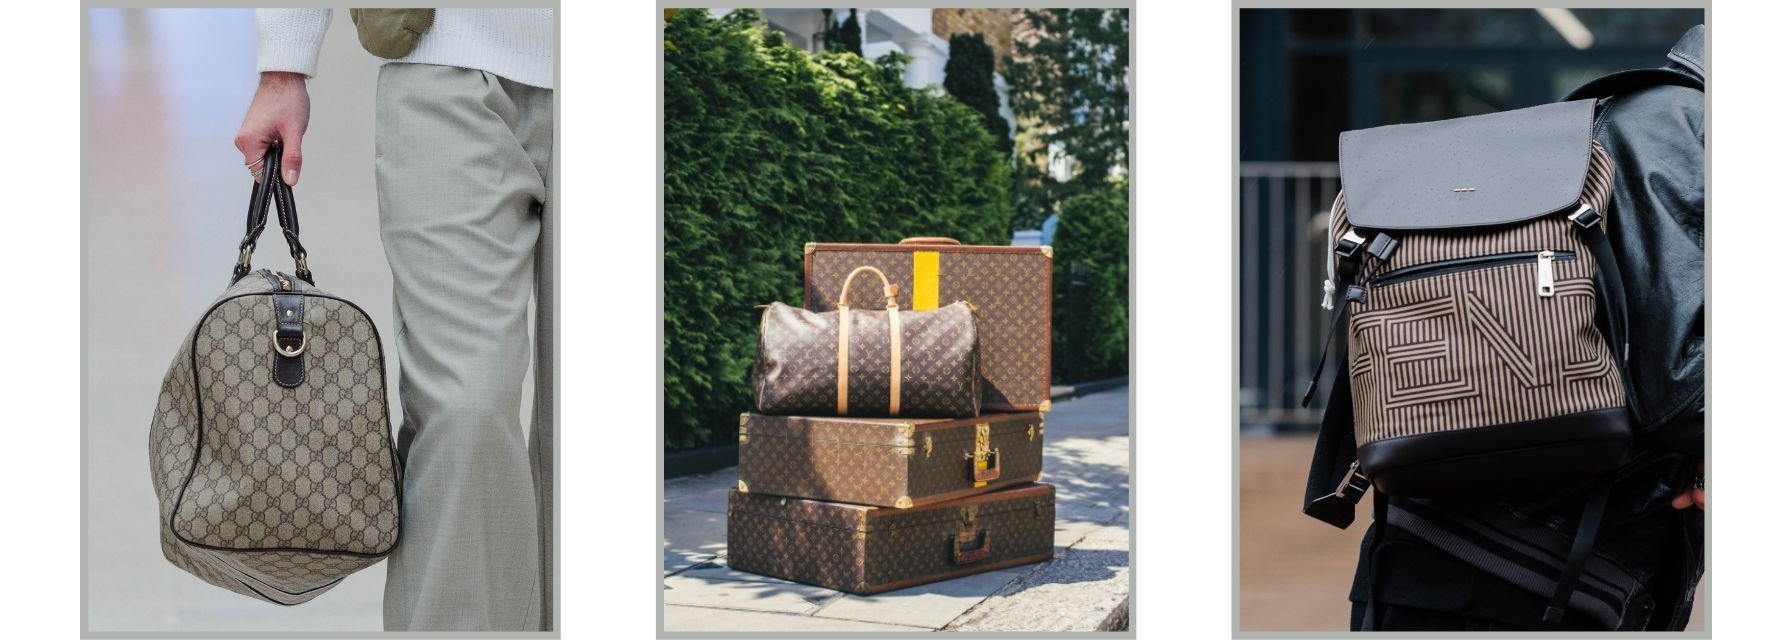 High Quality Louis Vuitton LV Replica Travel Rolling Luggage